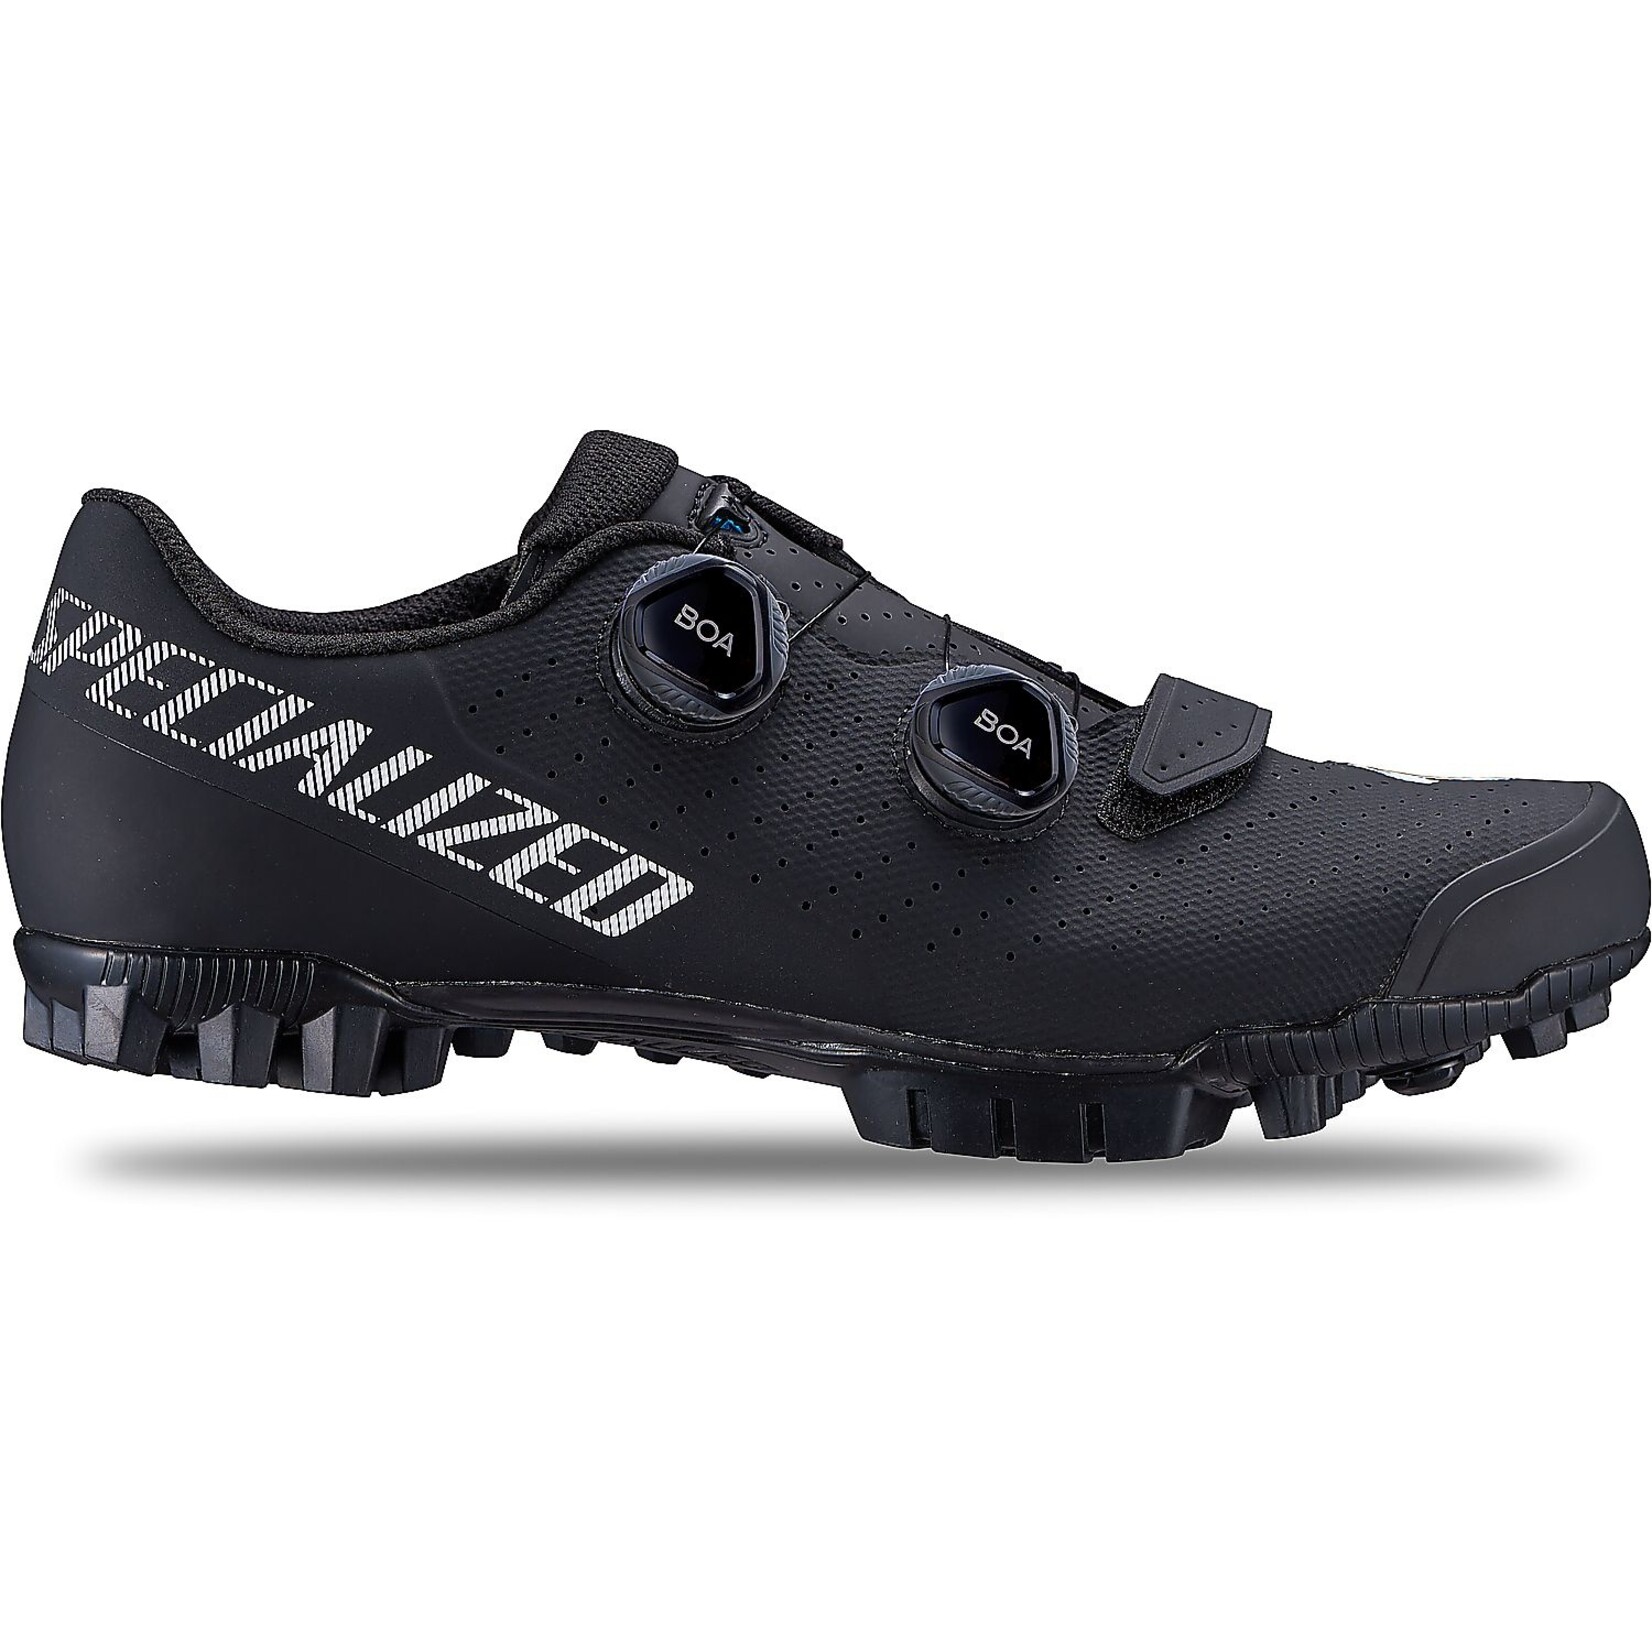 Specialized Recon 3.0 Mountain Bike Shoes in Black